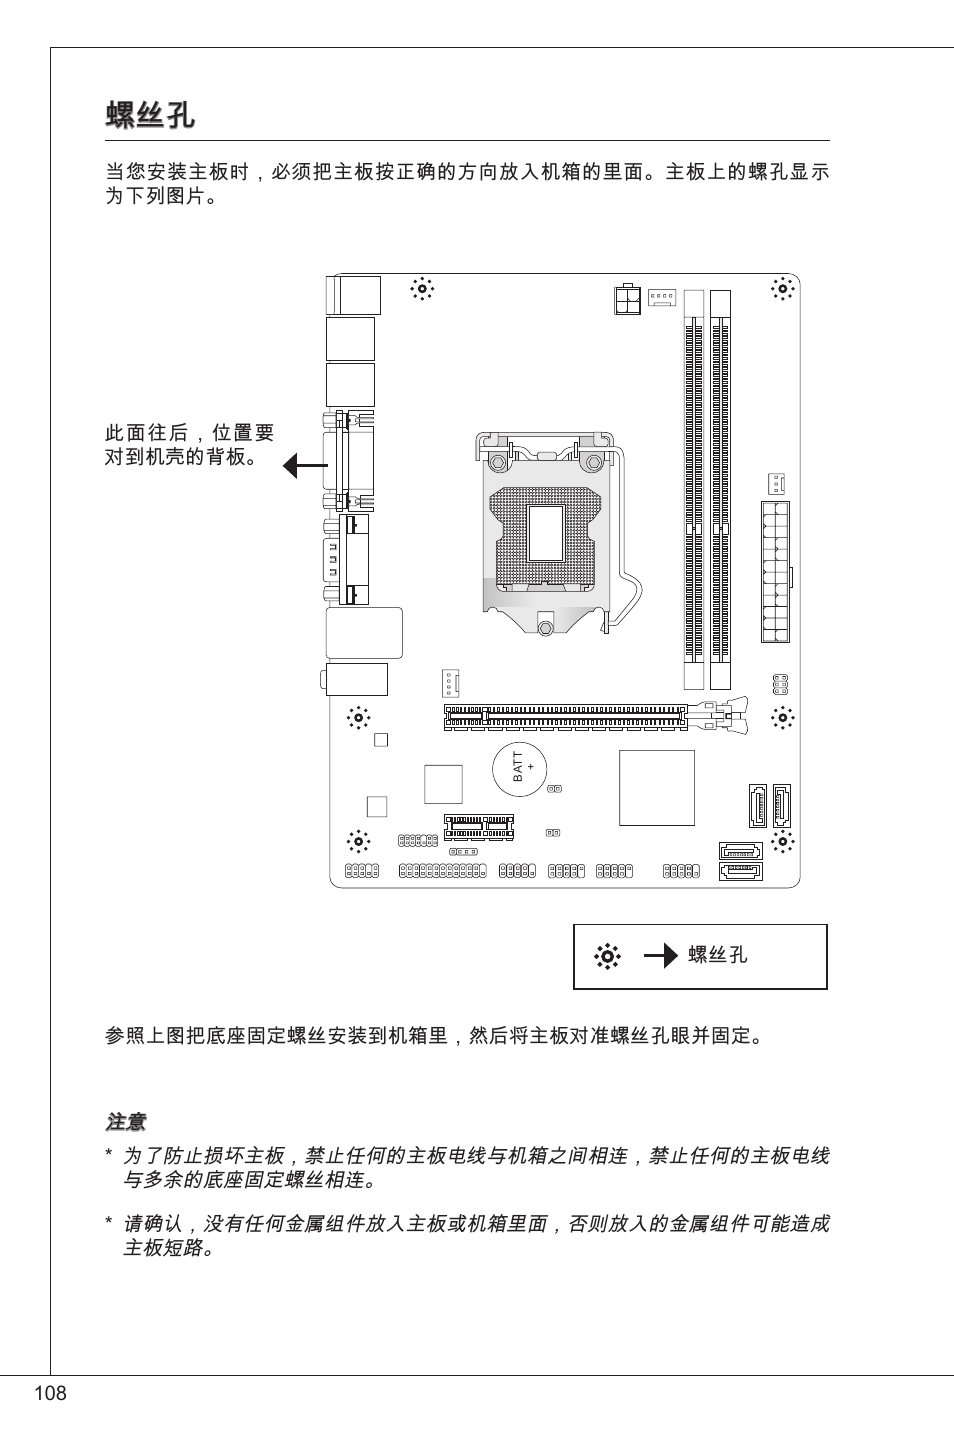 MSI H61M-P20 (G3) User Manual | Page 108 / 159 | Original mode | Also for:  H61M-P31/W8